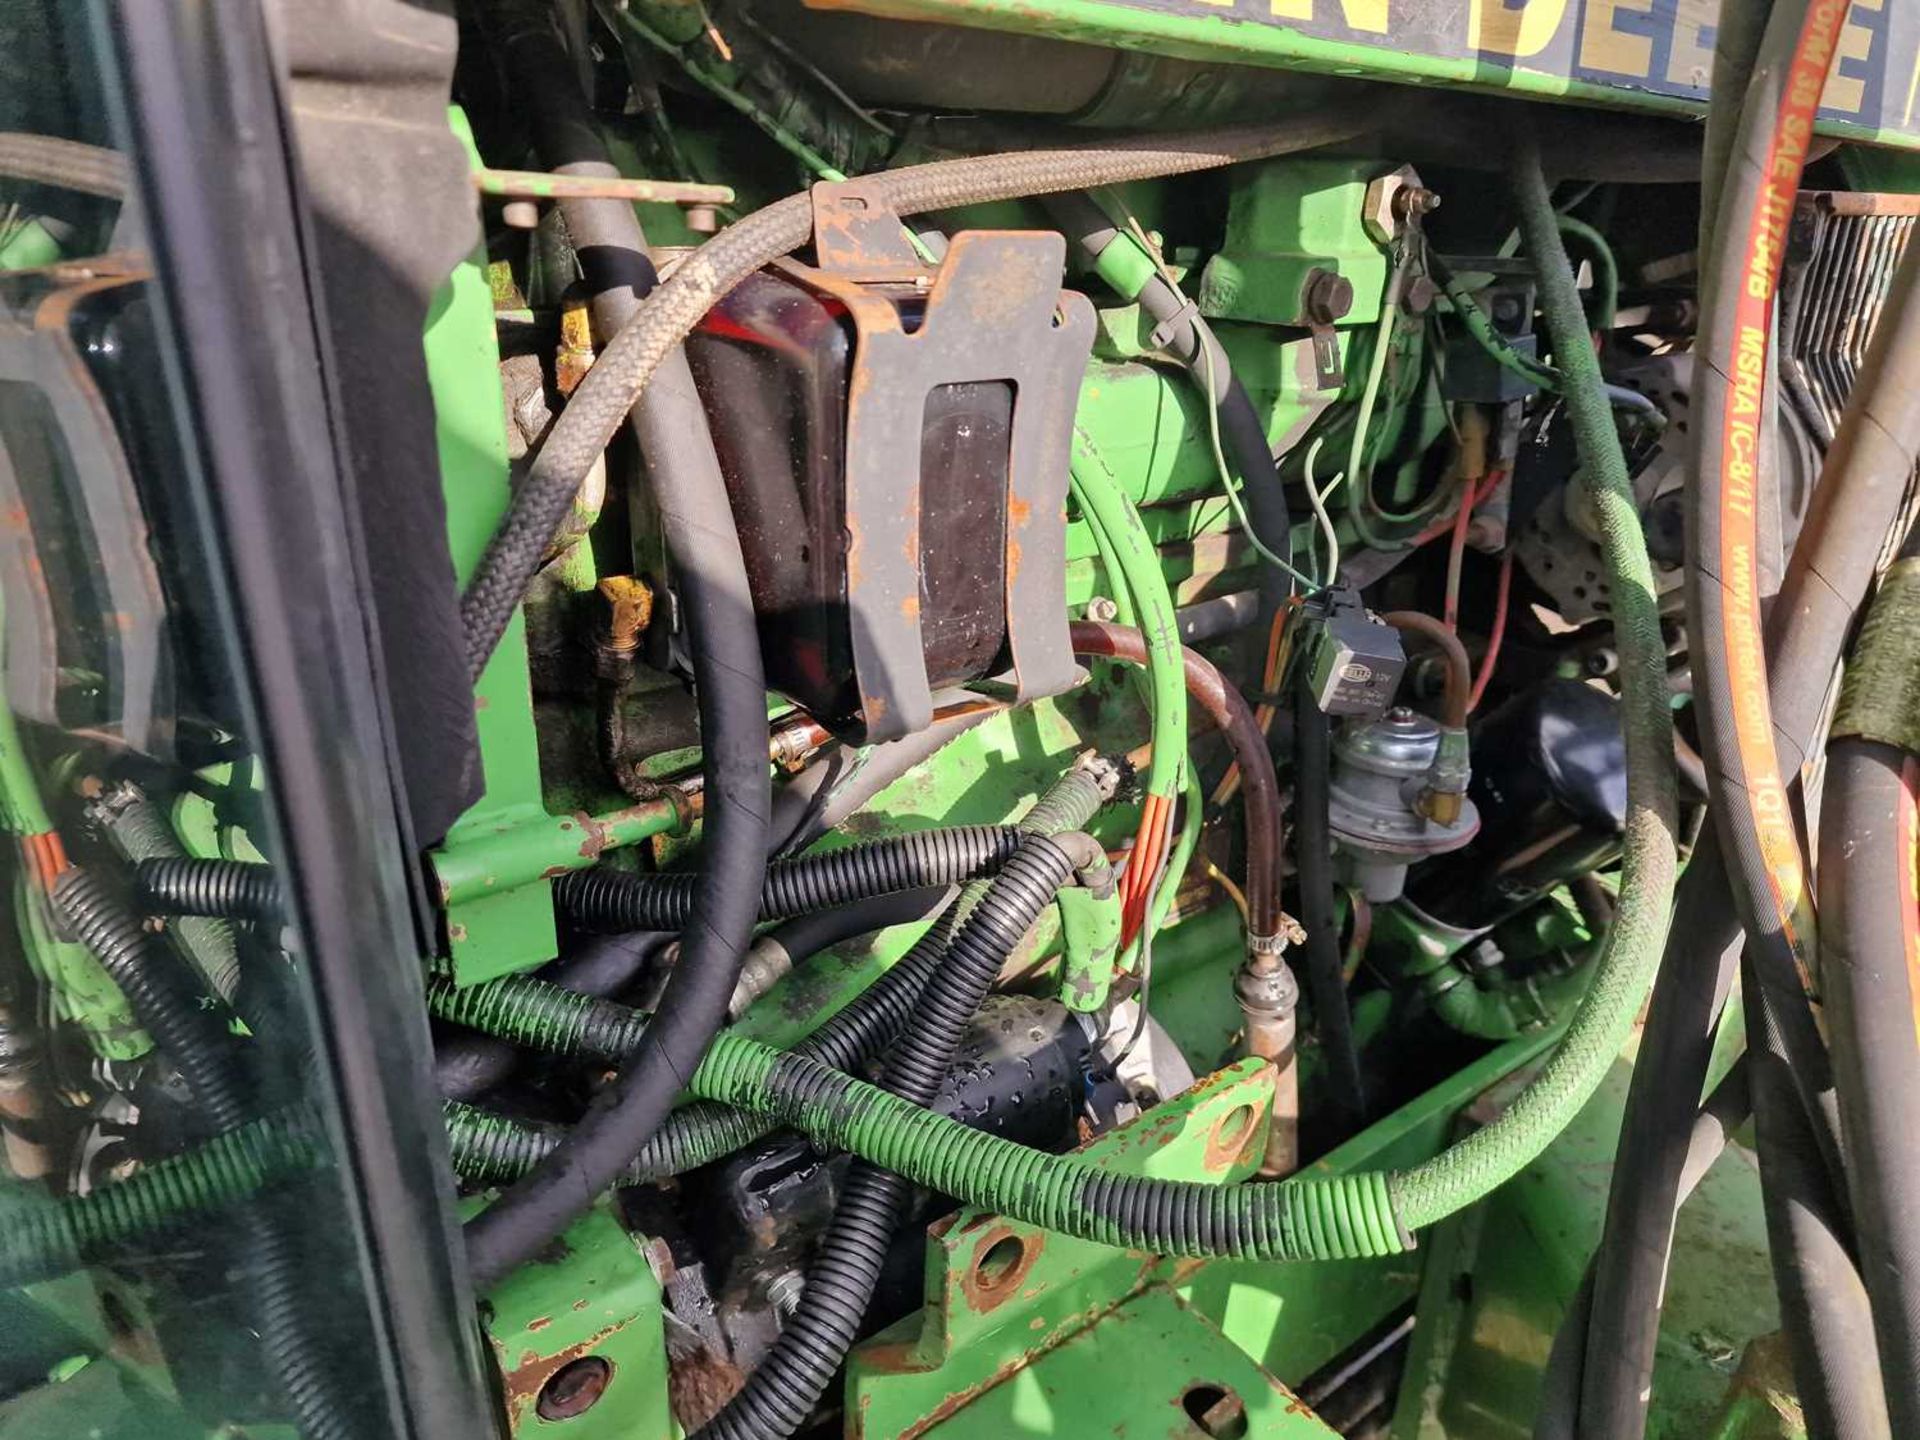 1989 John Deere 2850 4WD Tractor, Loader, 2 Spool Valves, Push Out Hitch (Reg. Docs. Available) - Image 19 of 25